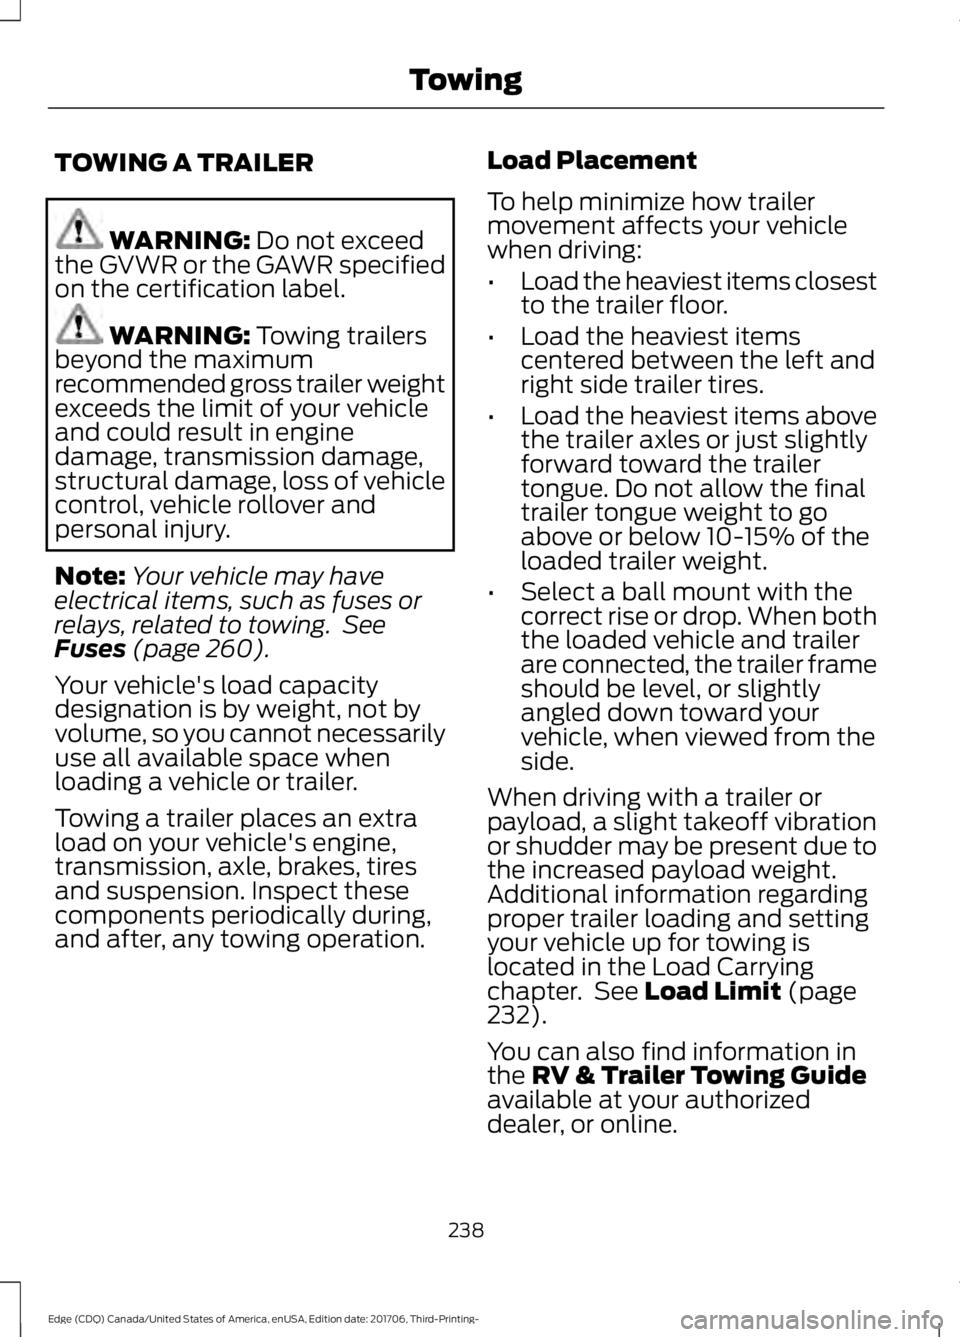 FORD EDGE 2018 User Guide TOWING A TRAILER
WARNING: Do not exceed
the GVWR or the GAWR specified
on the certification label. WARNING: 
Towing trailers
beyond the maximum
recommended gross trailer weight
exceeds the limit of yo